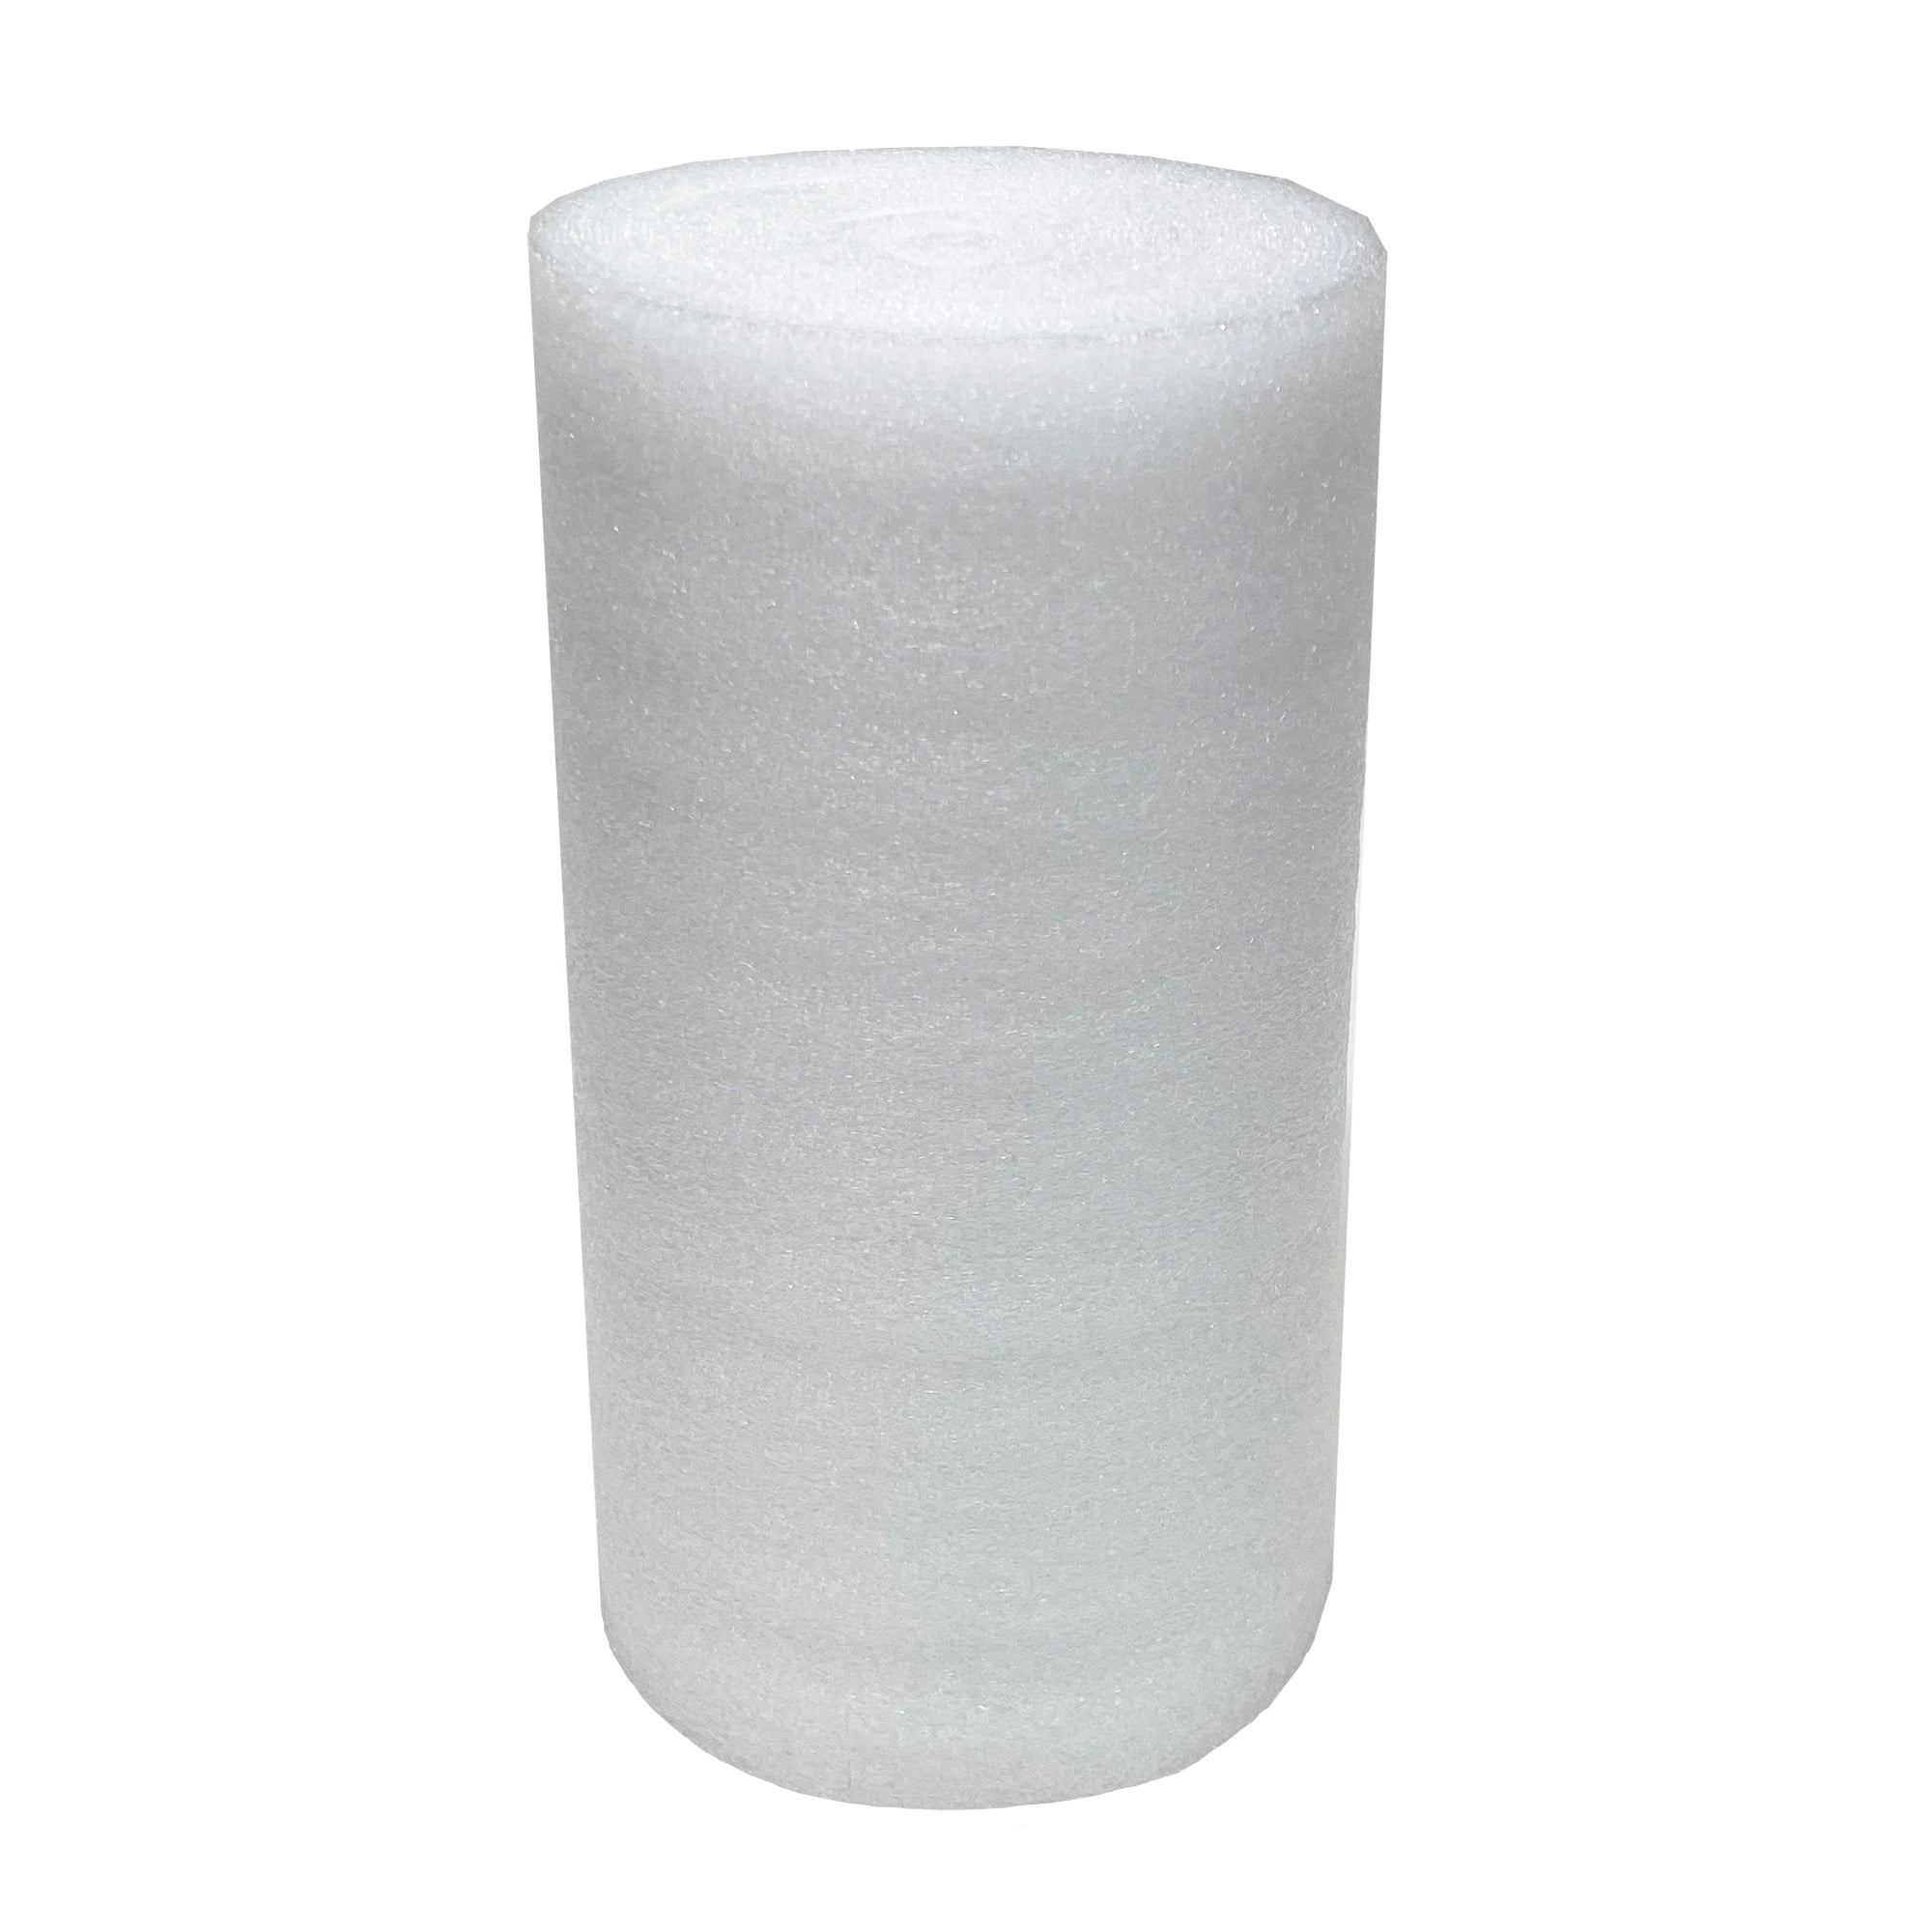 UPSable Shipping Foam Rolls, 1/8 Thick, 12 x 350', Perforated for $44.00  Online